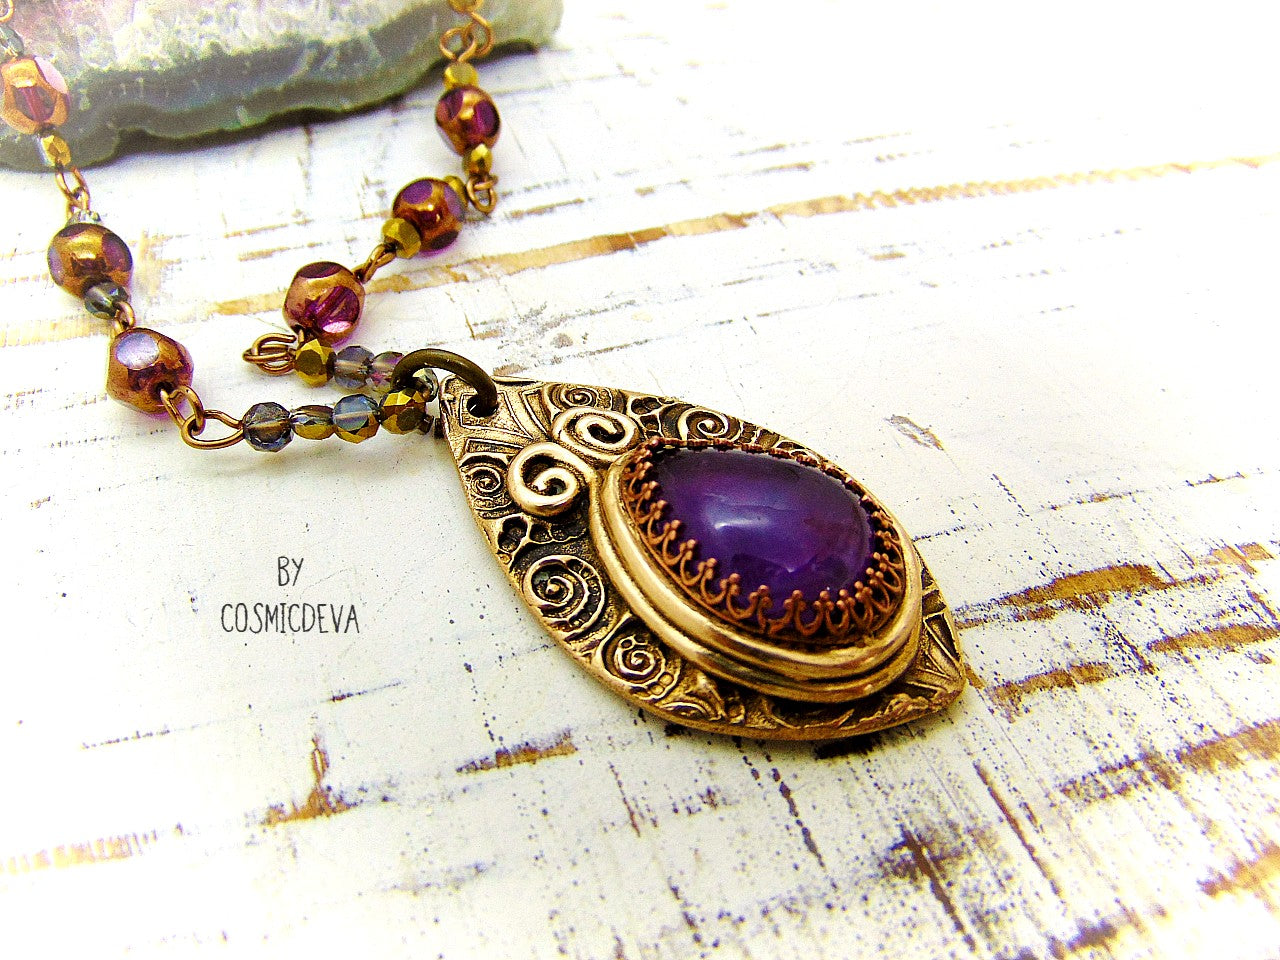 This unique Amethyst Pendant Necklace is an exquisite combination of modern and vintage. Hand sculptured in solid bronze with an elegant swirl texture and natural amethyst gemstone, its Boho gypsy style is complemented with a complete handmade rosary wire chain of purple gold faceted Czech glass beads.